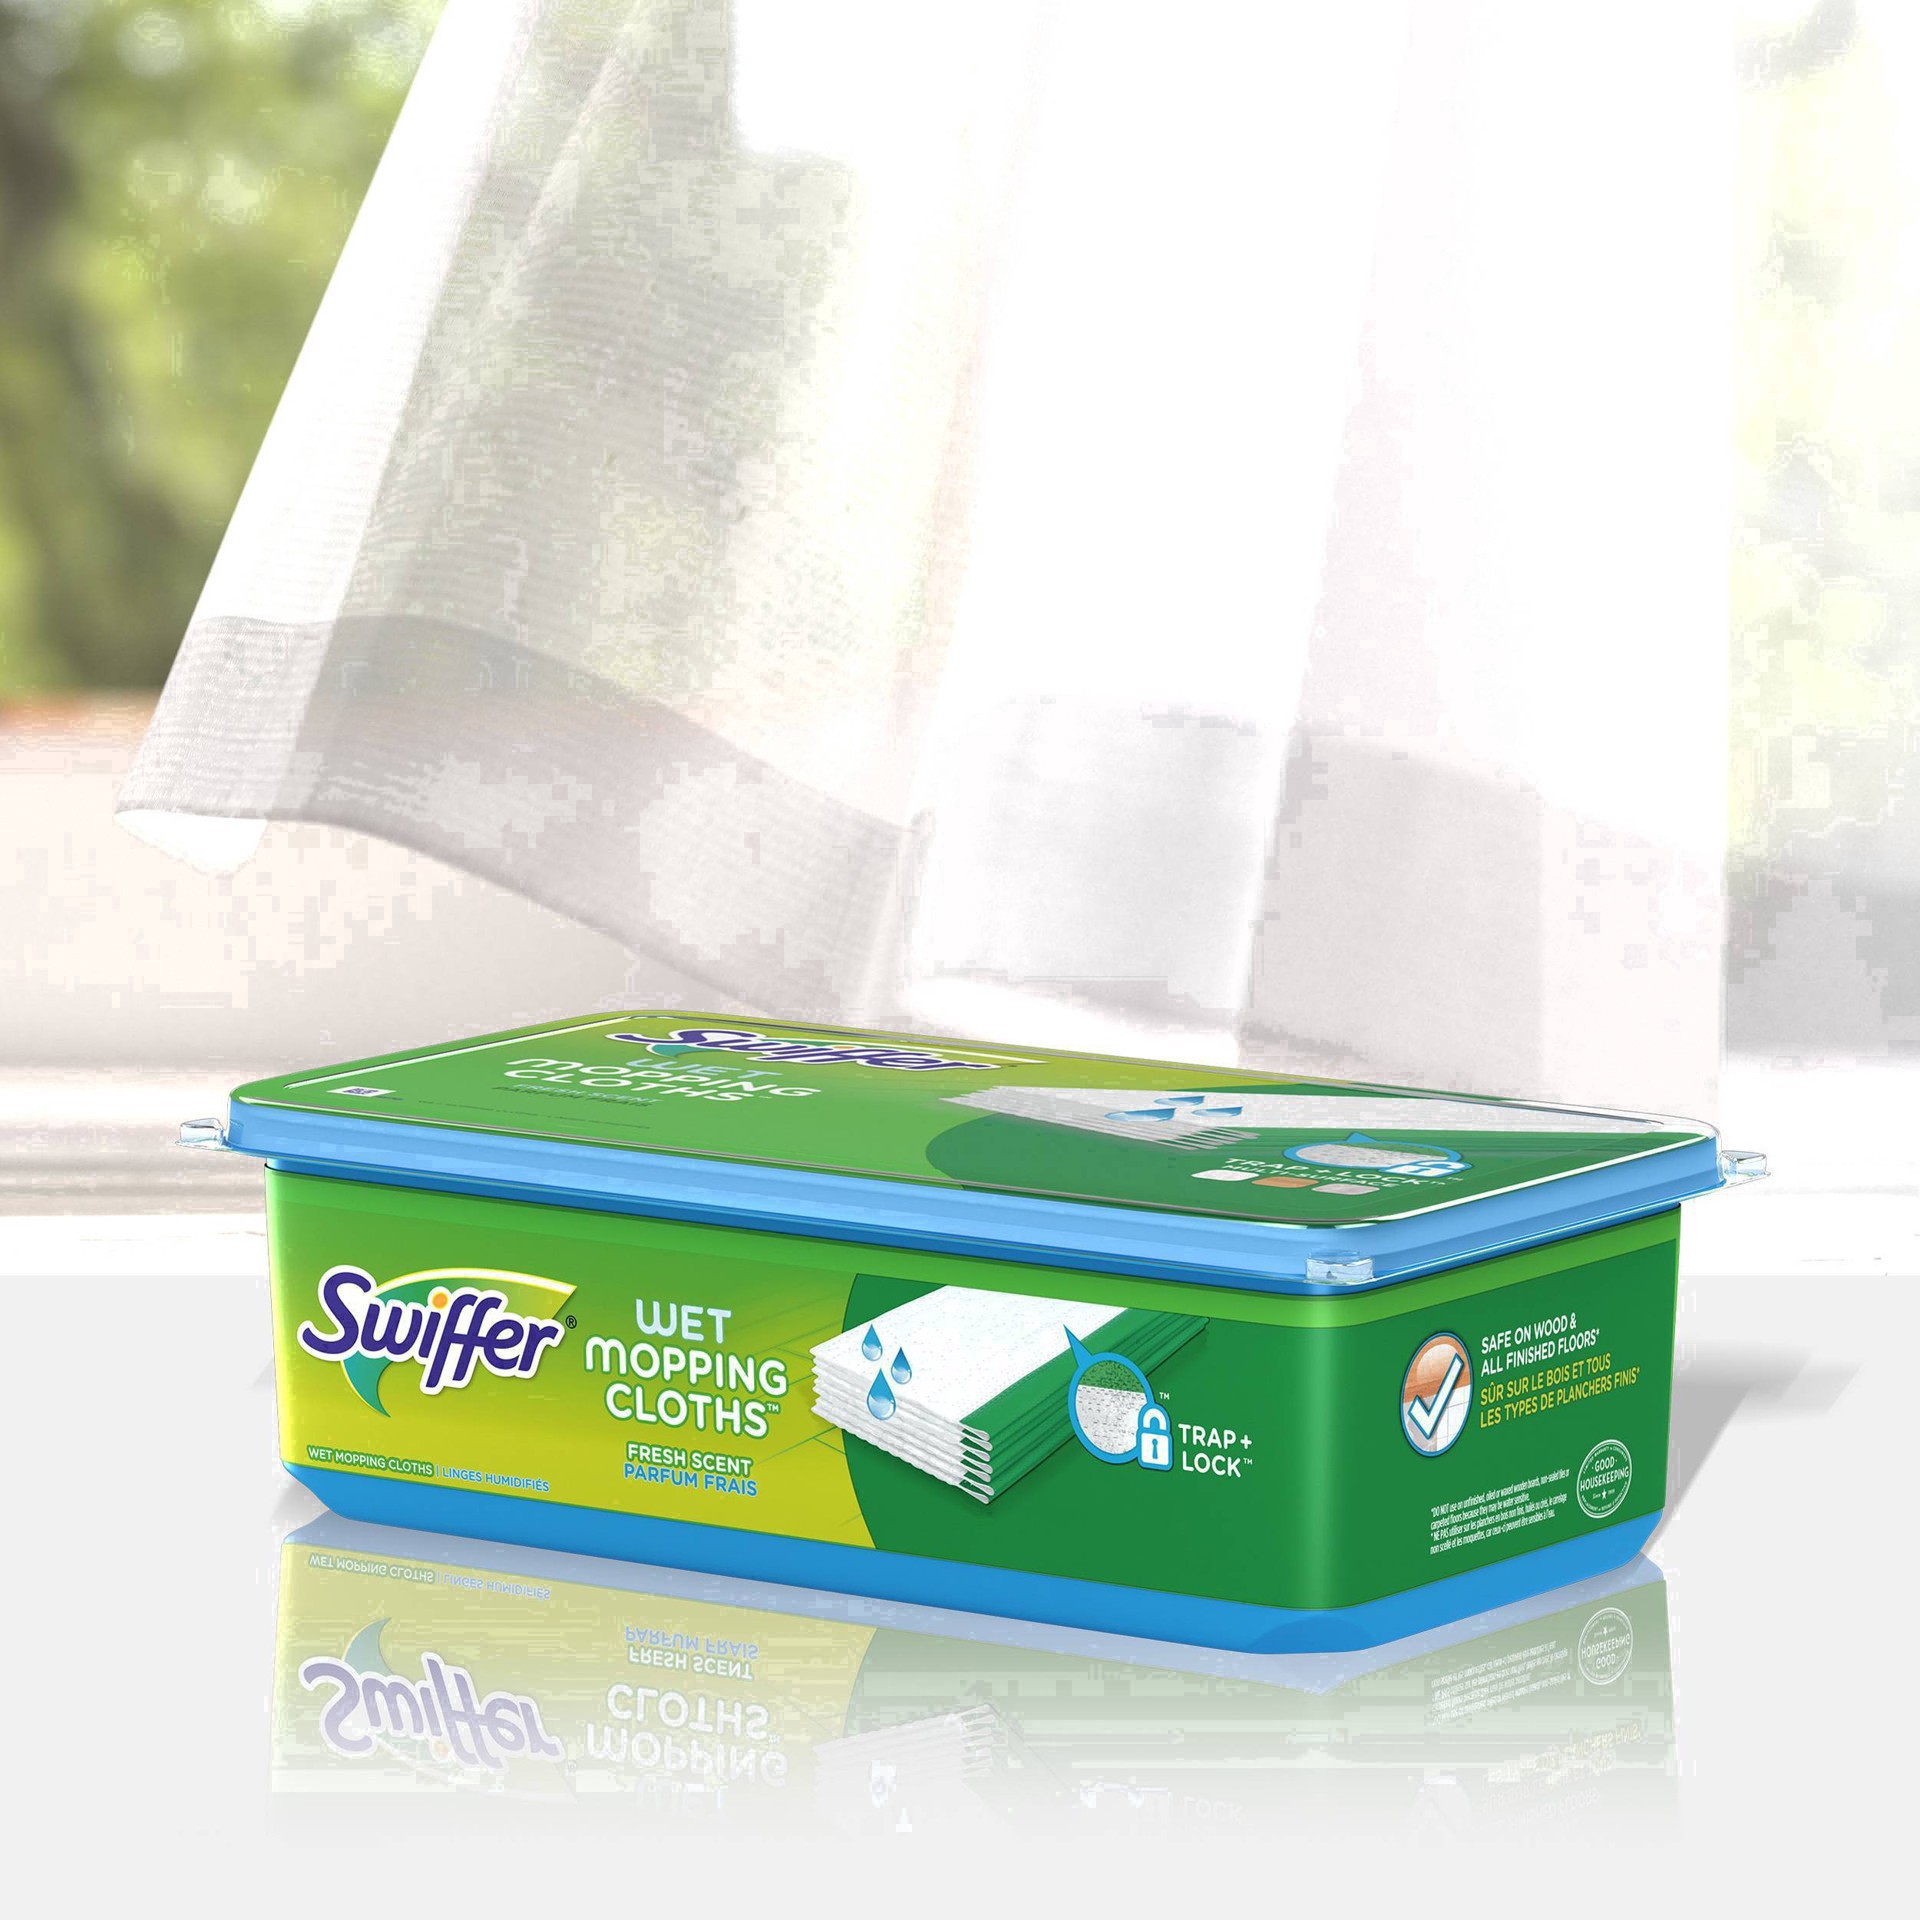 Swiffer Swiffer Sweeper Wet Mopping Cloths, with Gain Scent, 12 count